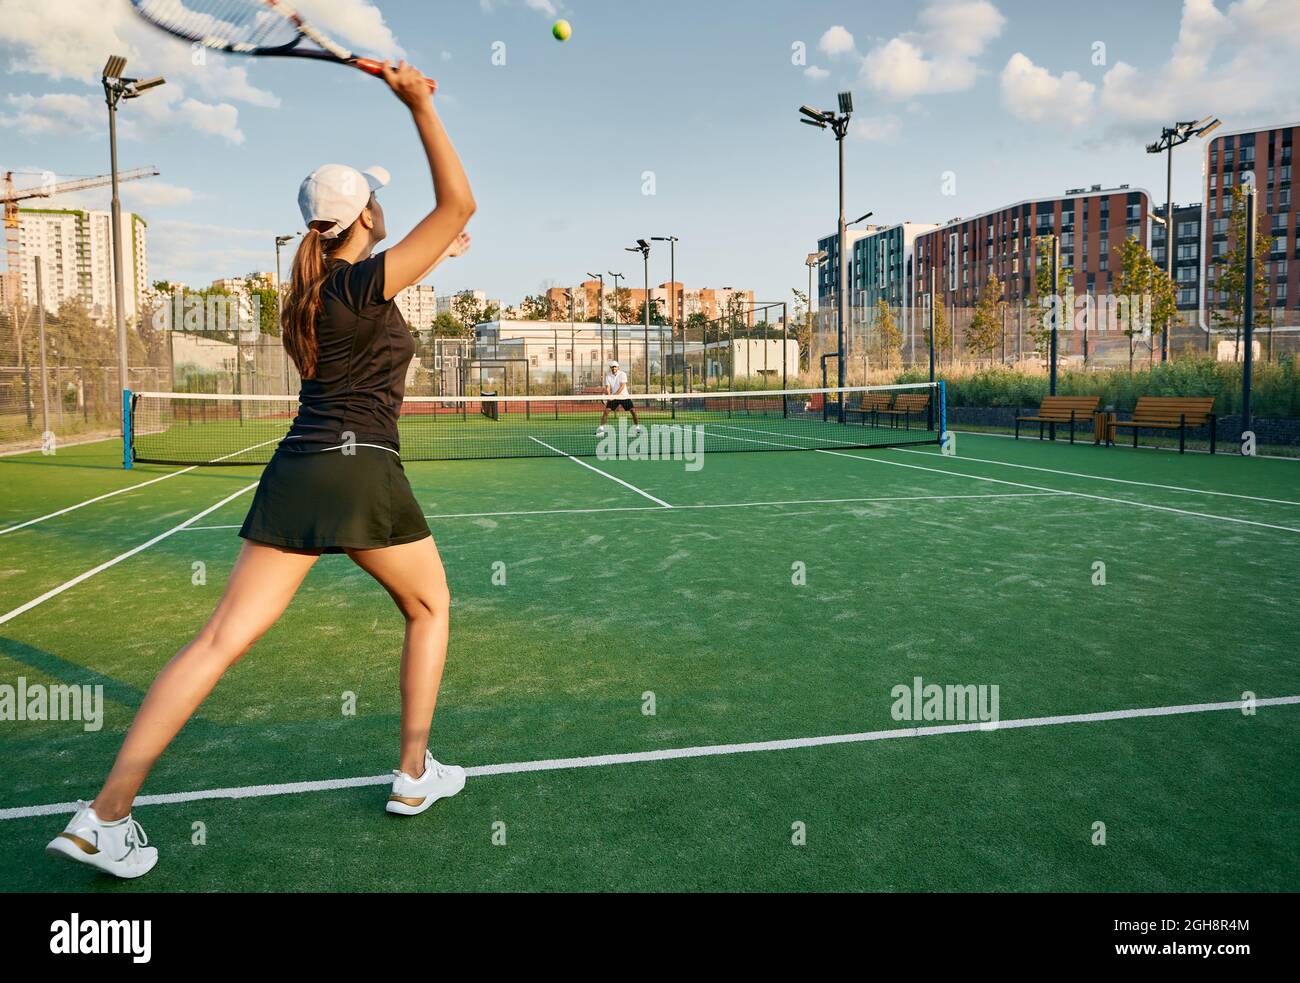 tennis player serves ball while playing match with her male partner on a grass court in urban environment. Female tennis player with tennis racket and Stock Photo